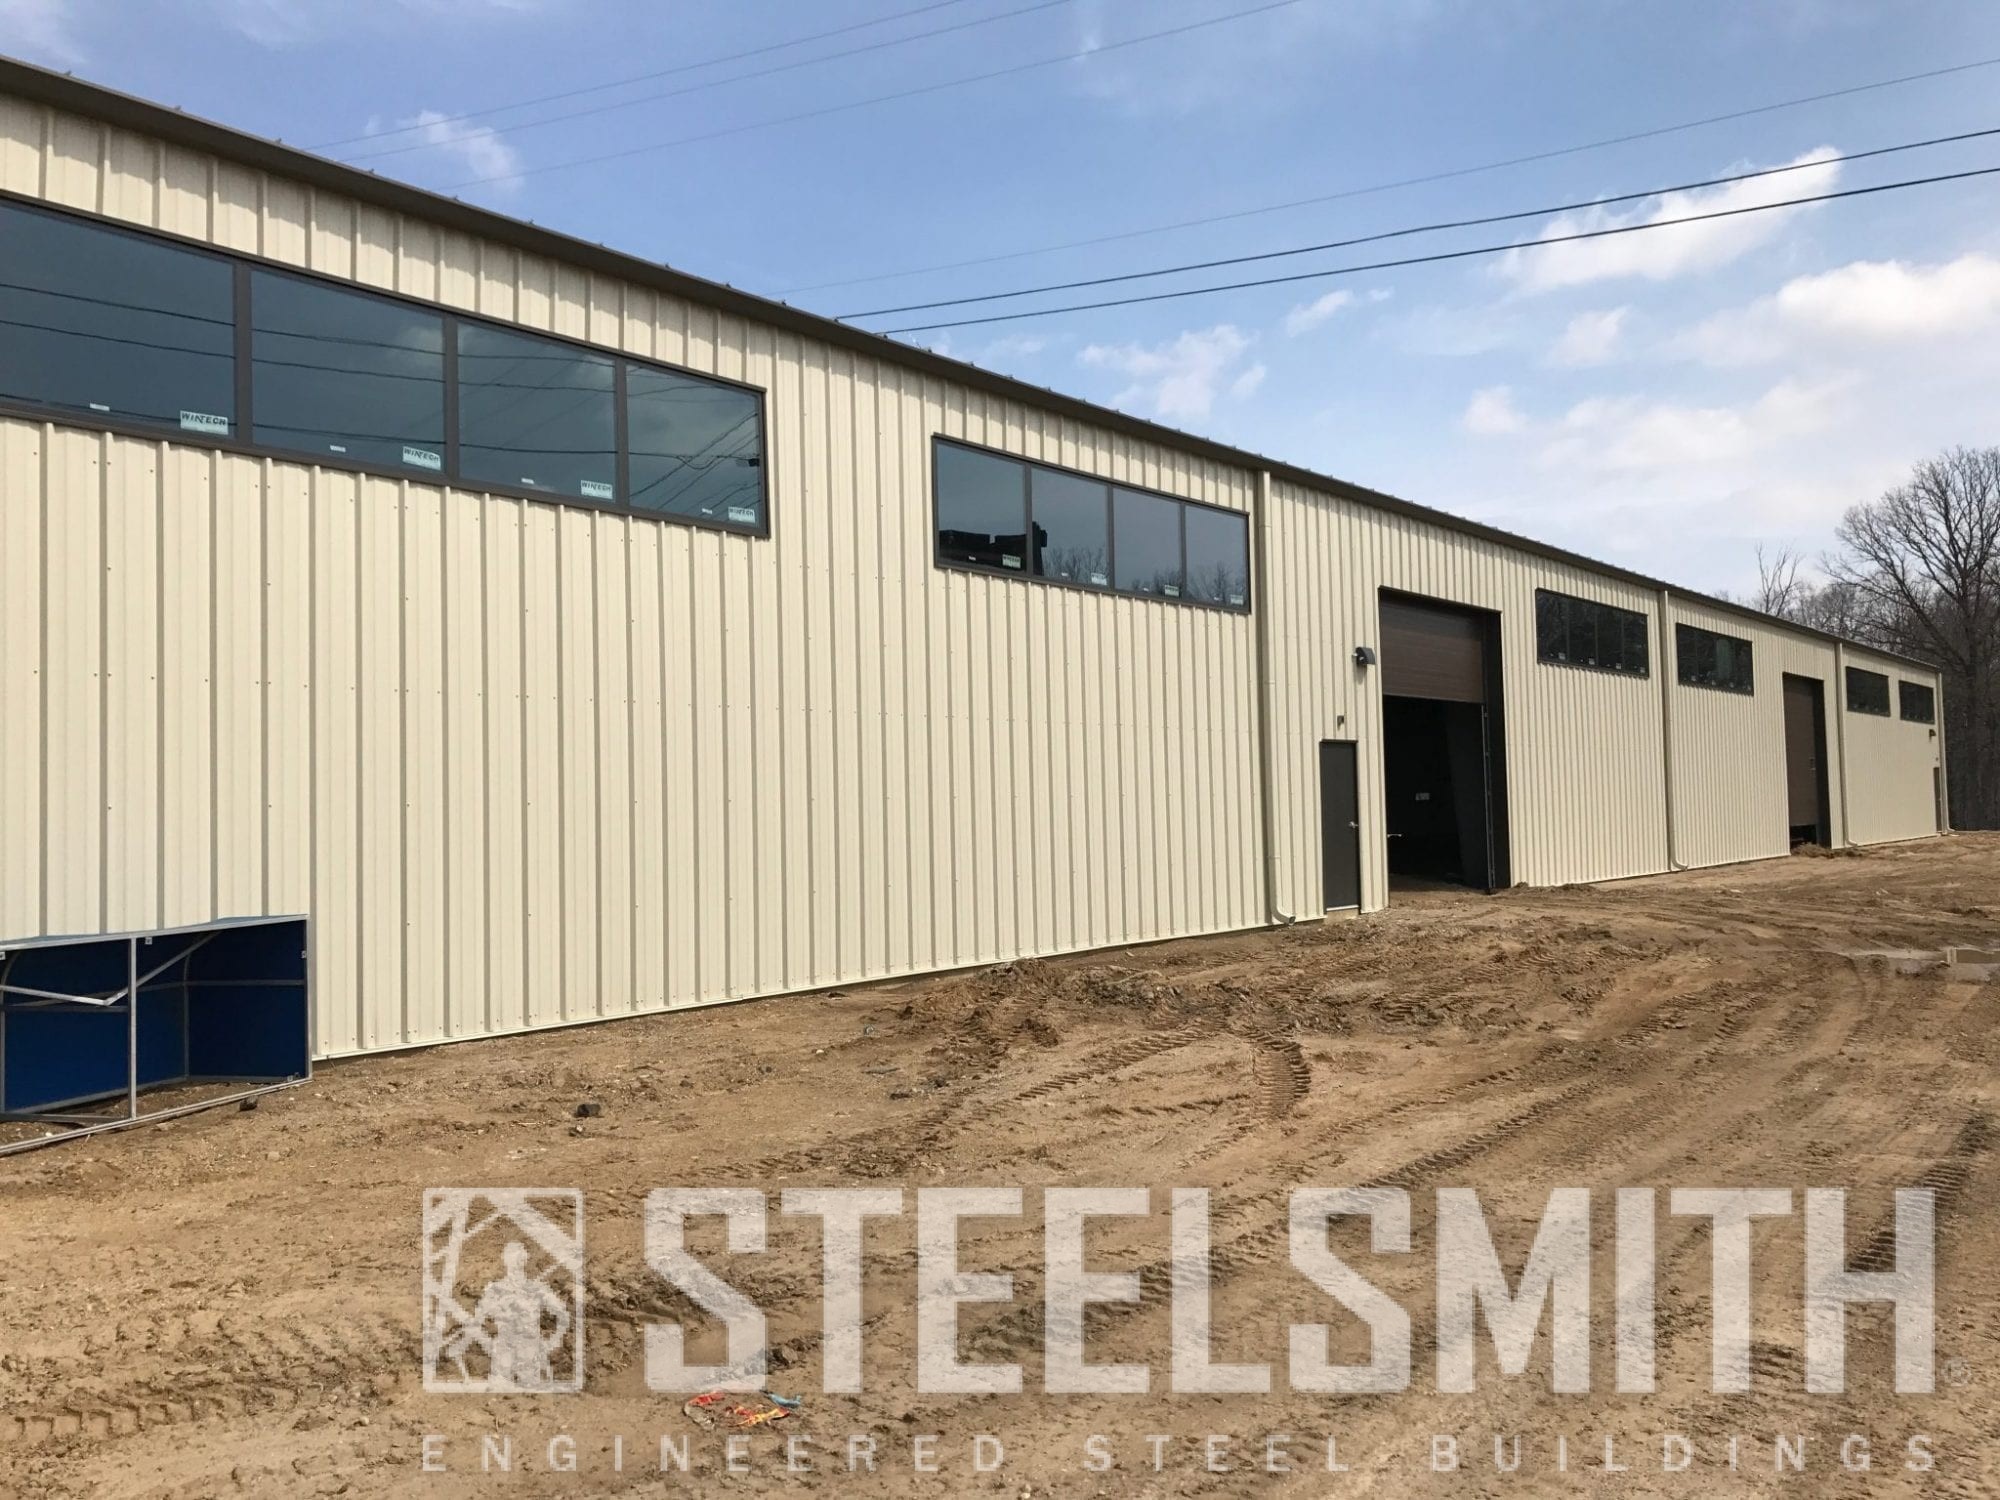 Industrial  Steelsmith Inc Steel Buildings and Design Build Services